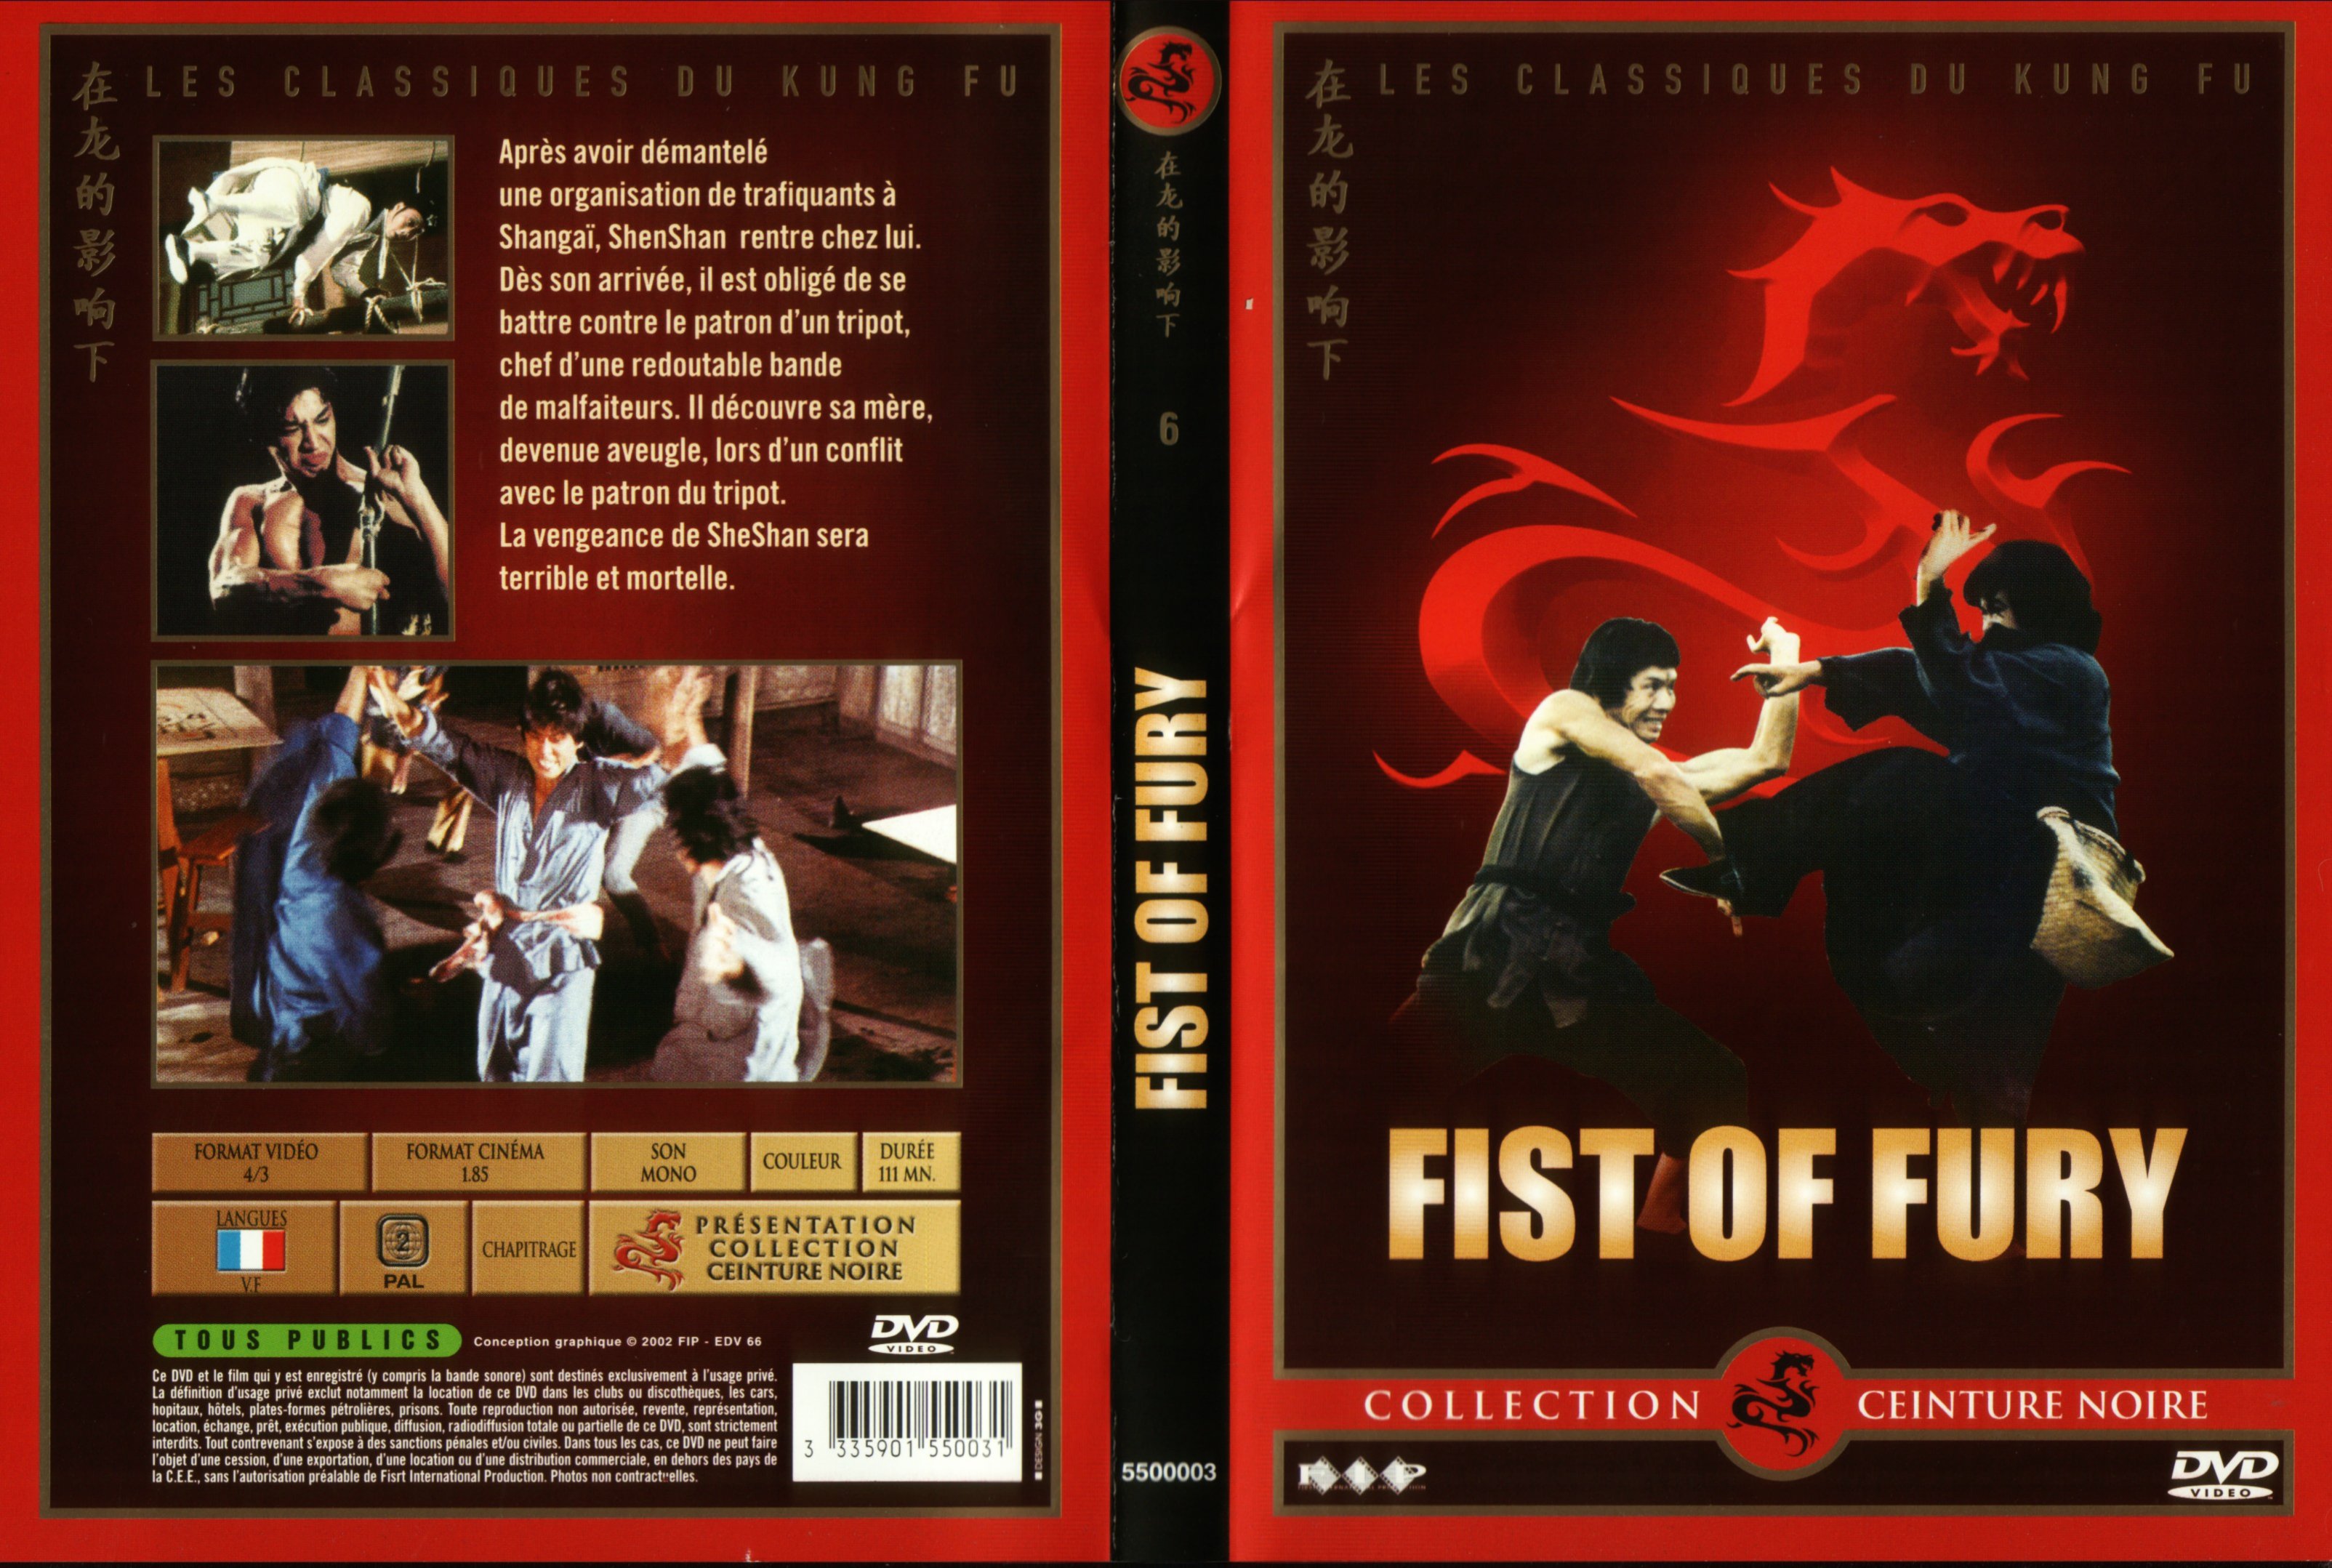 Jaquette DVD Fist of fury